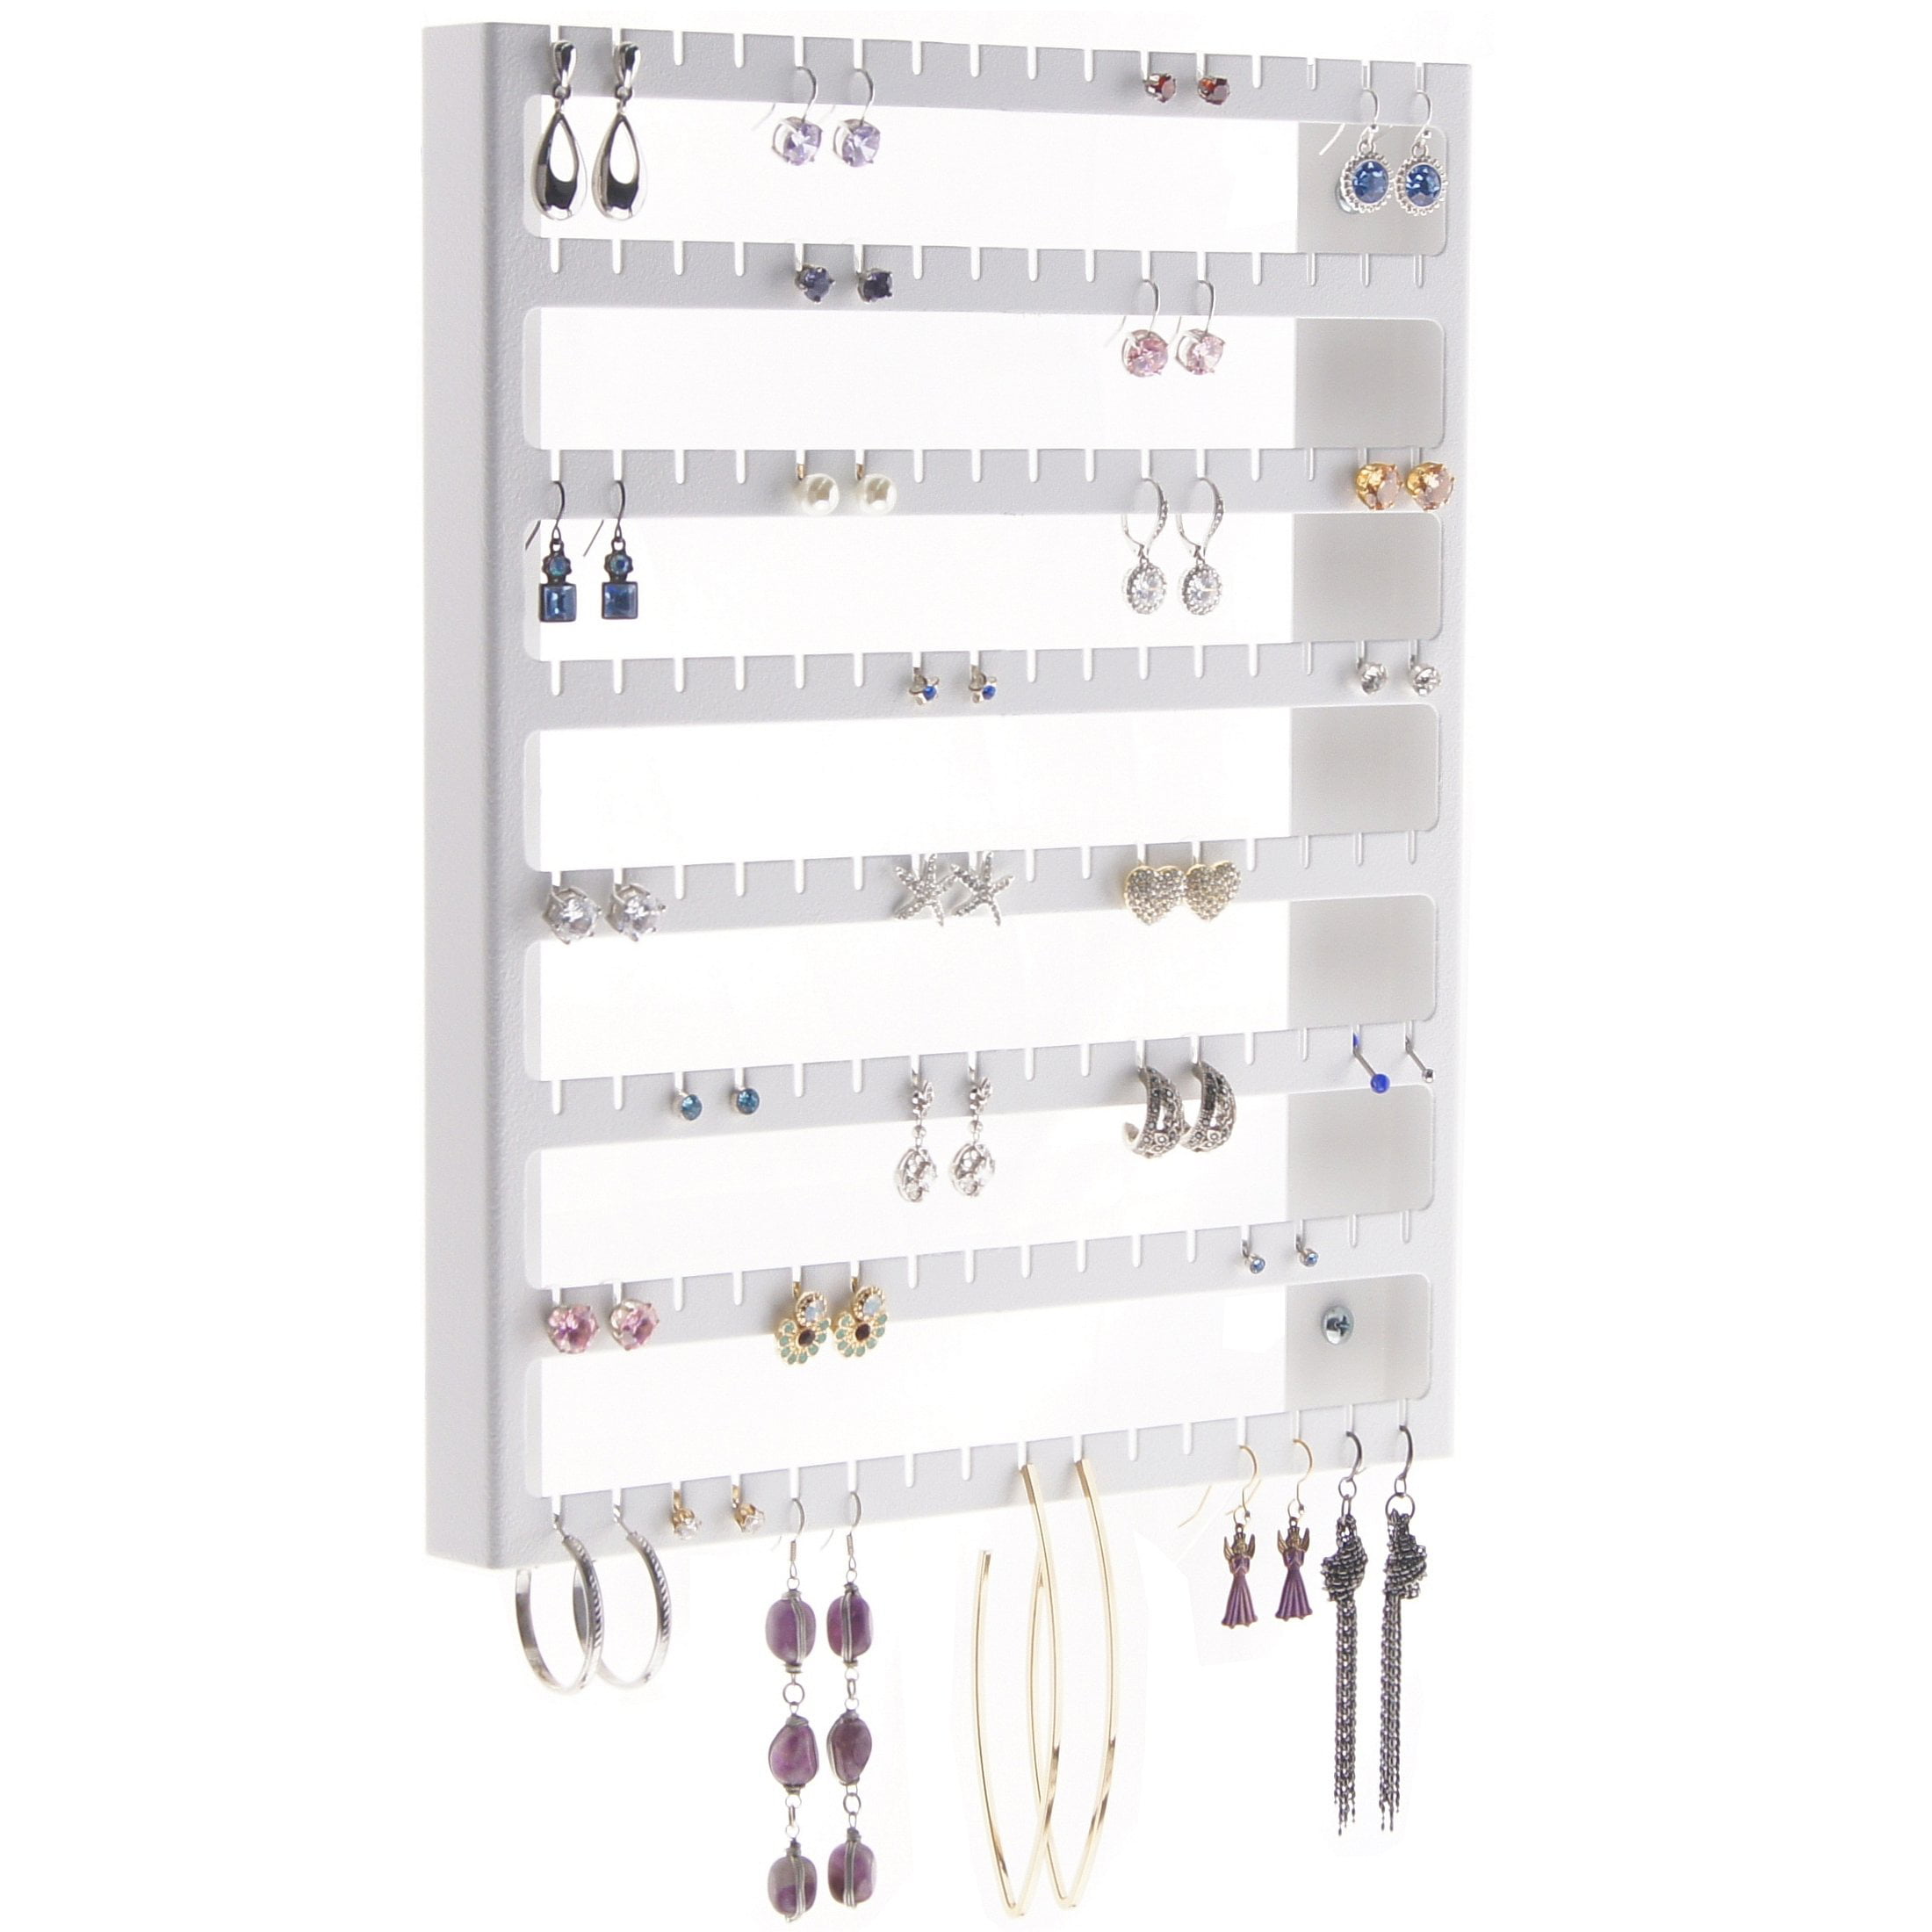 Details about   Wall Door Mount Jewelry Organizer Studs Necklaces Storage Stand Holder Home